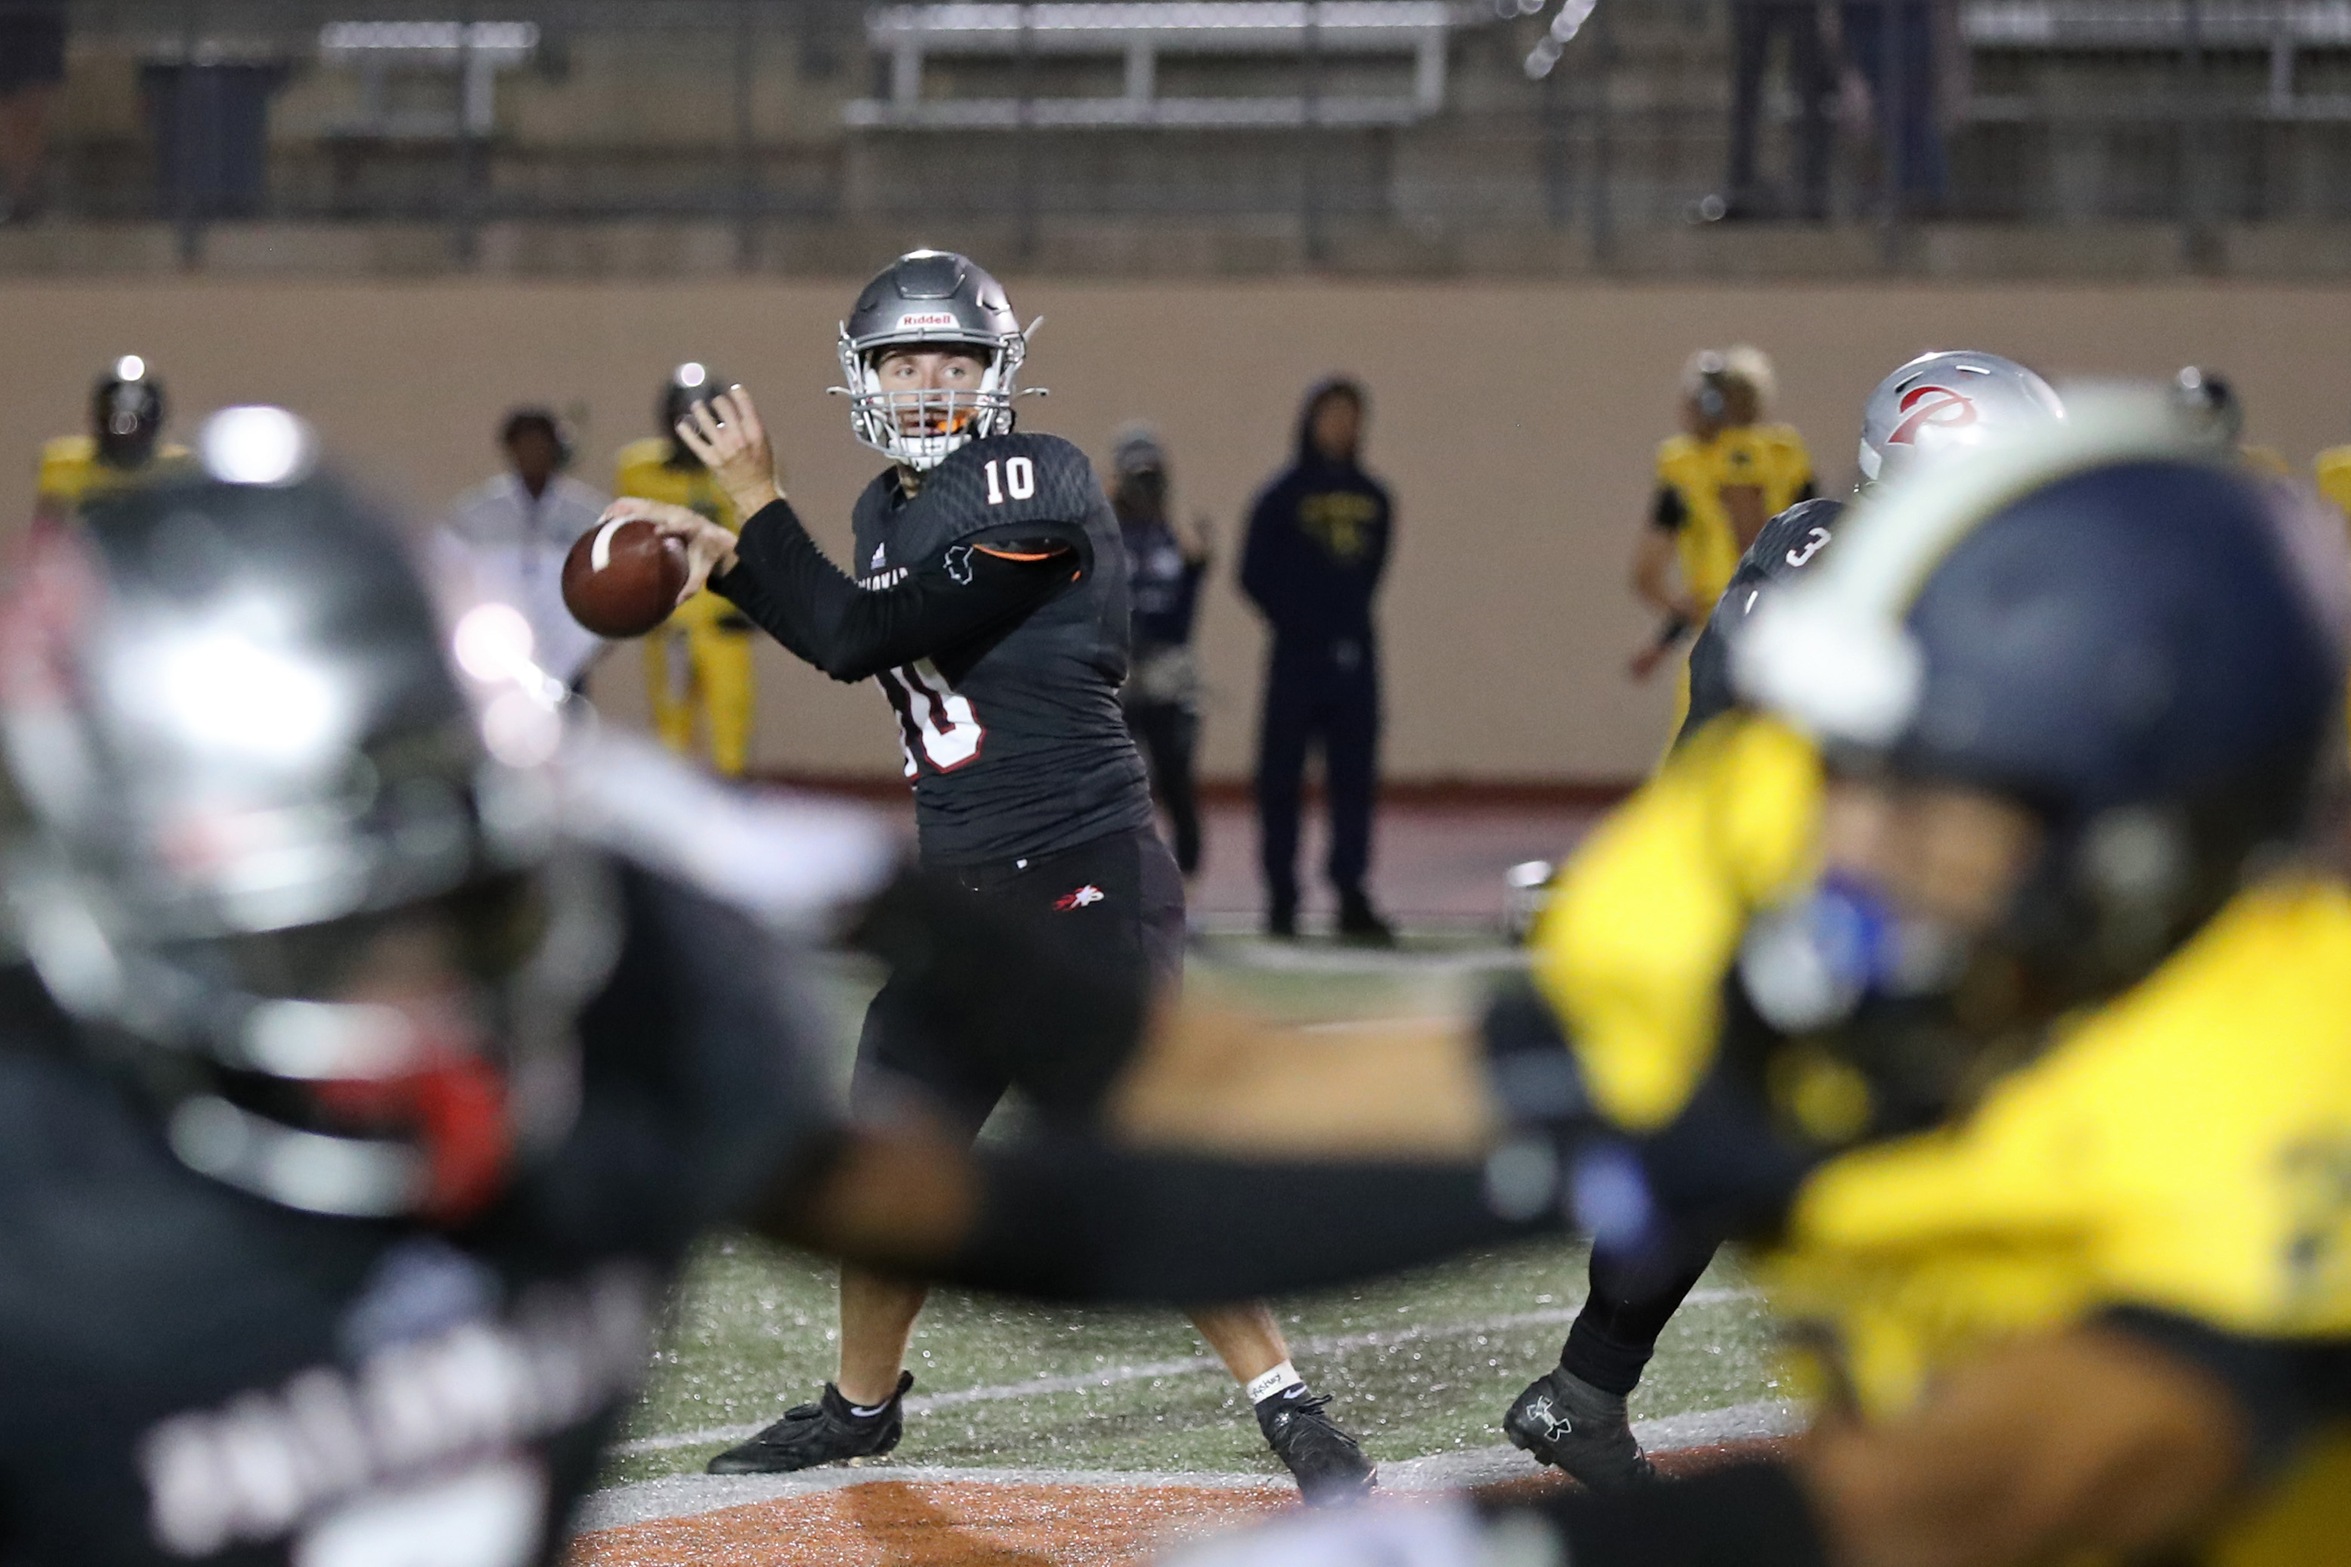 Zeke Payne had 1658 passing yards on the season and 12 touchdown passes. Photo by Hugh Cox (taken 10/2/2021).